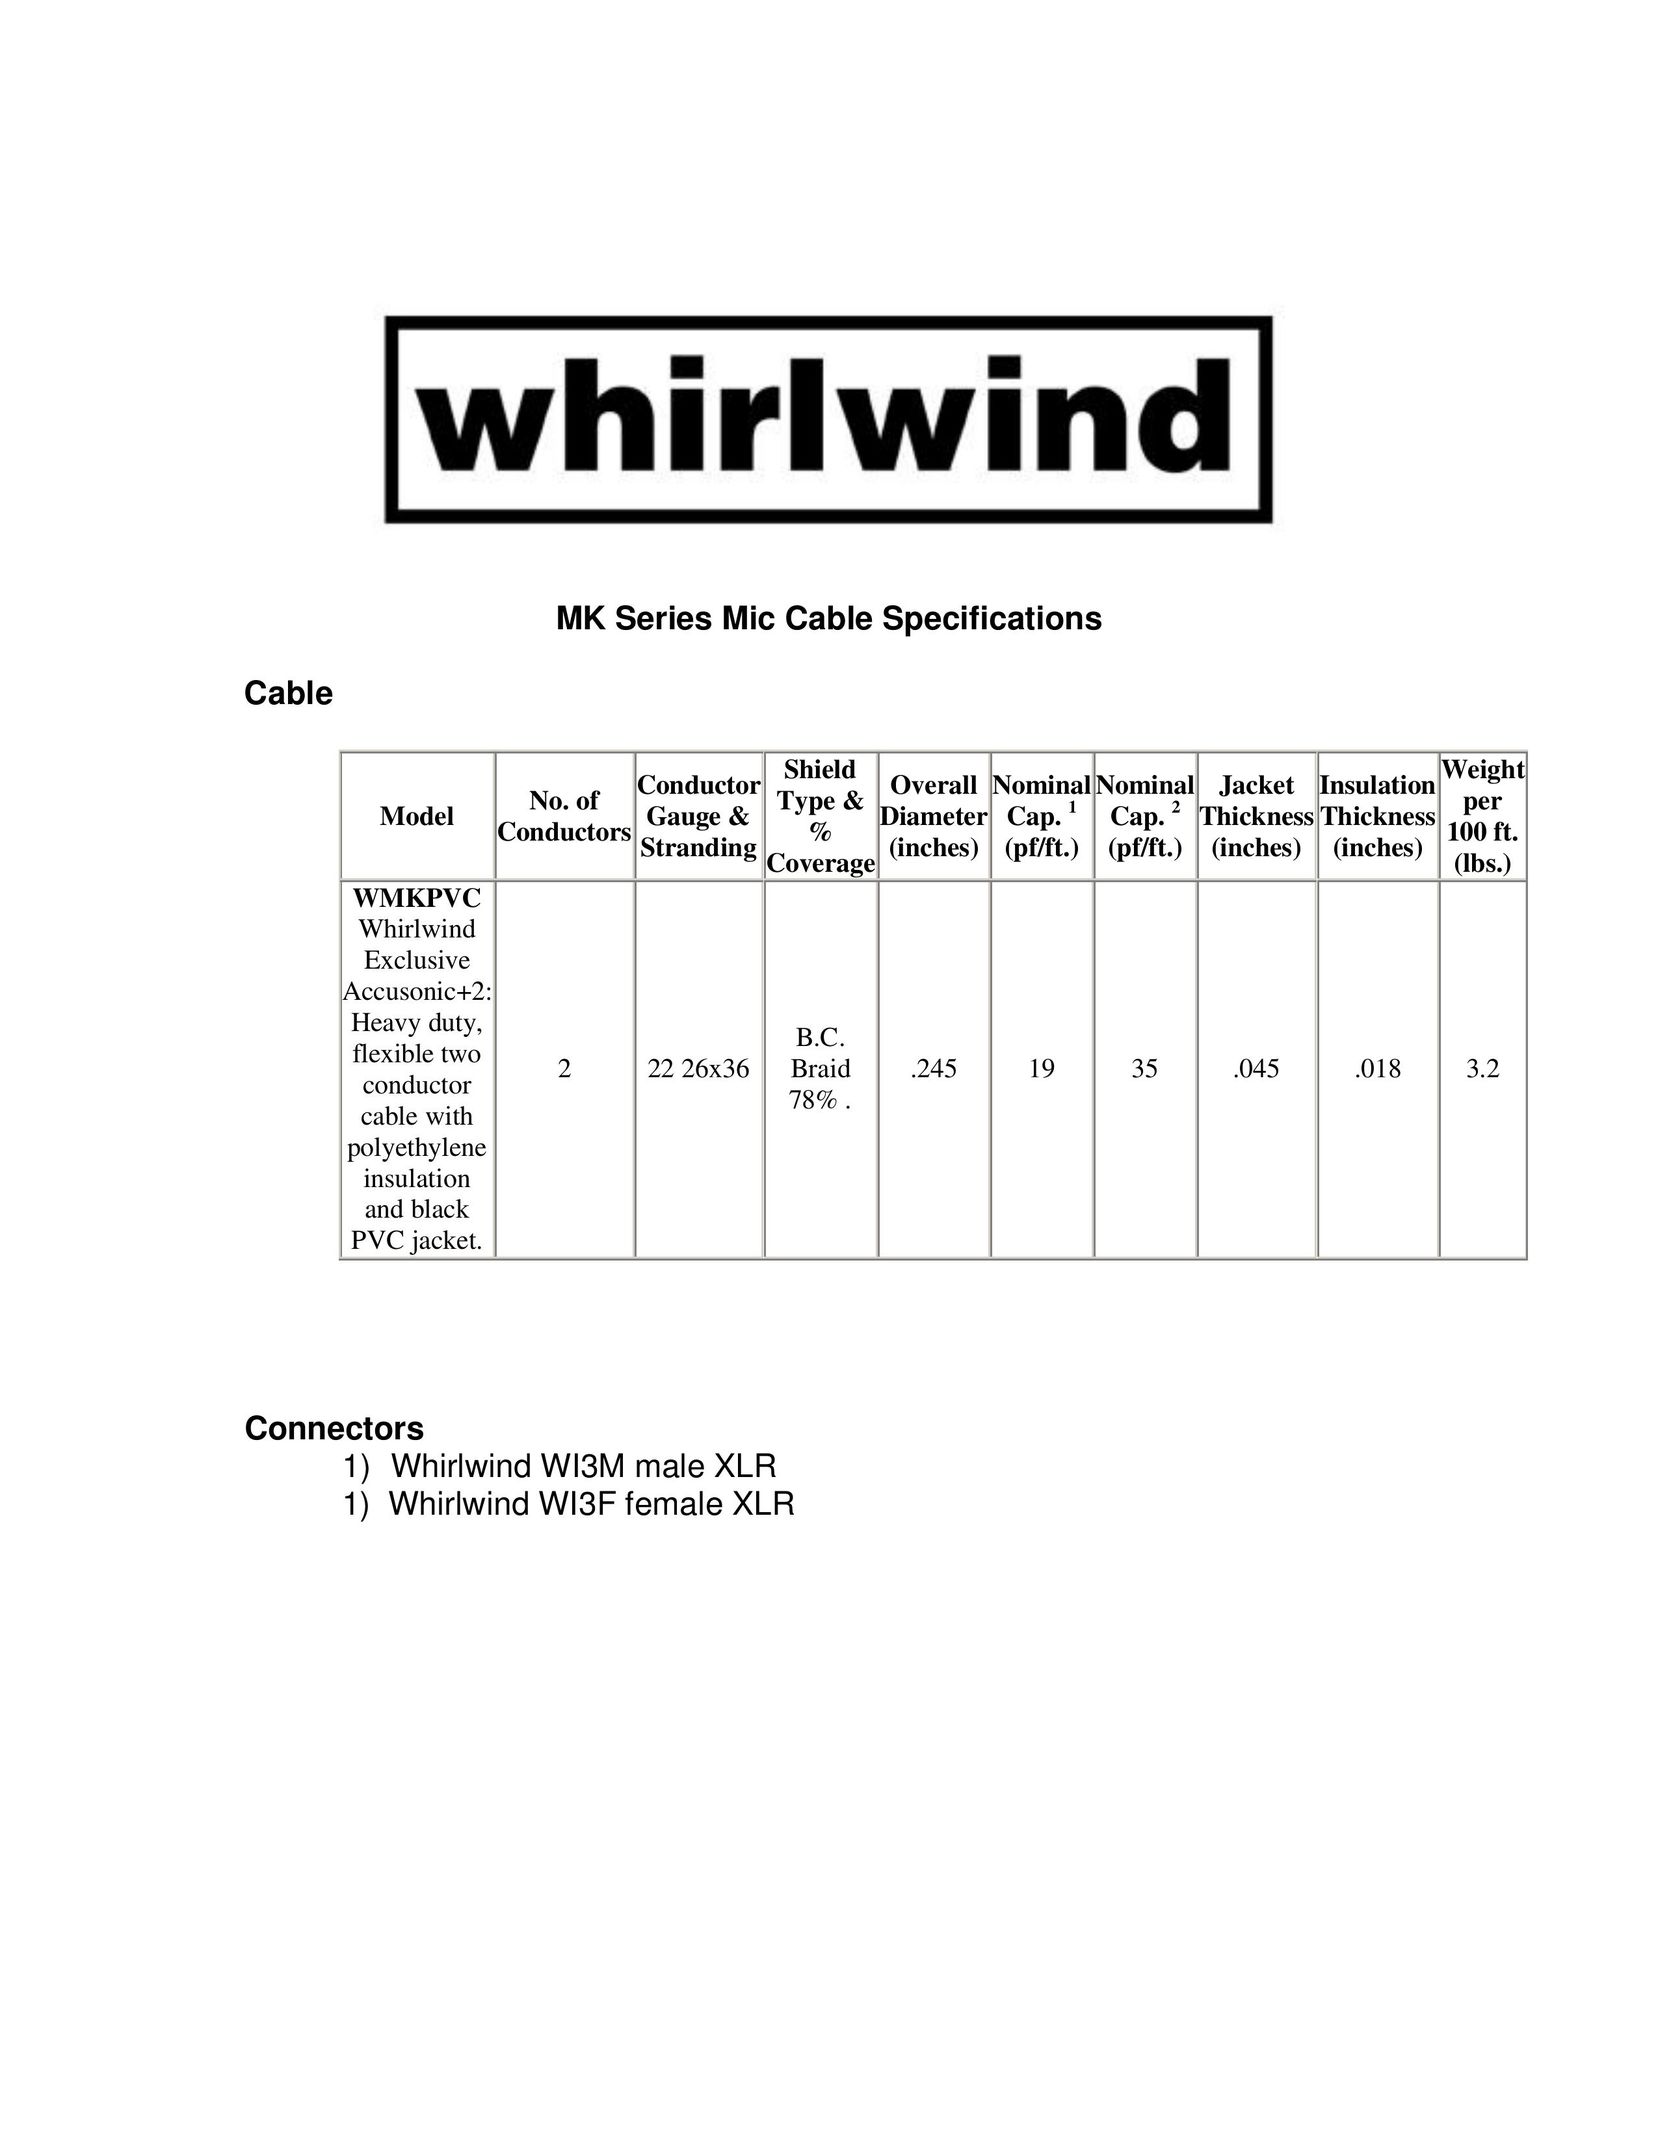 Whirlwind WMKPVC TV Cables User Manual